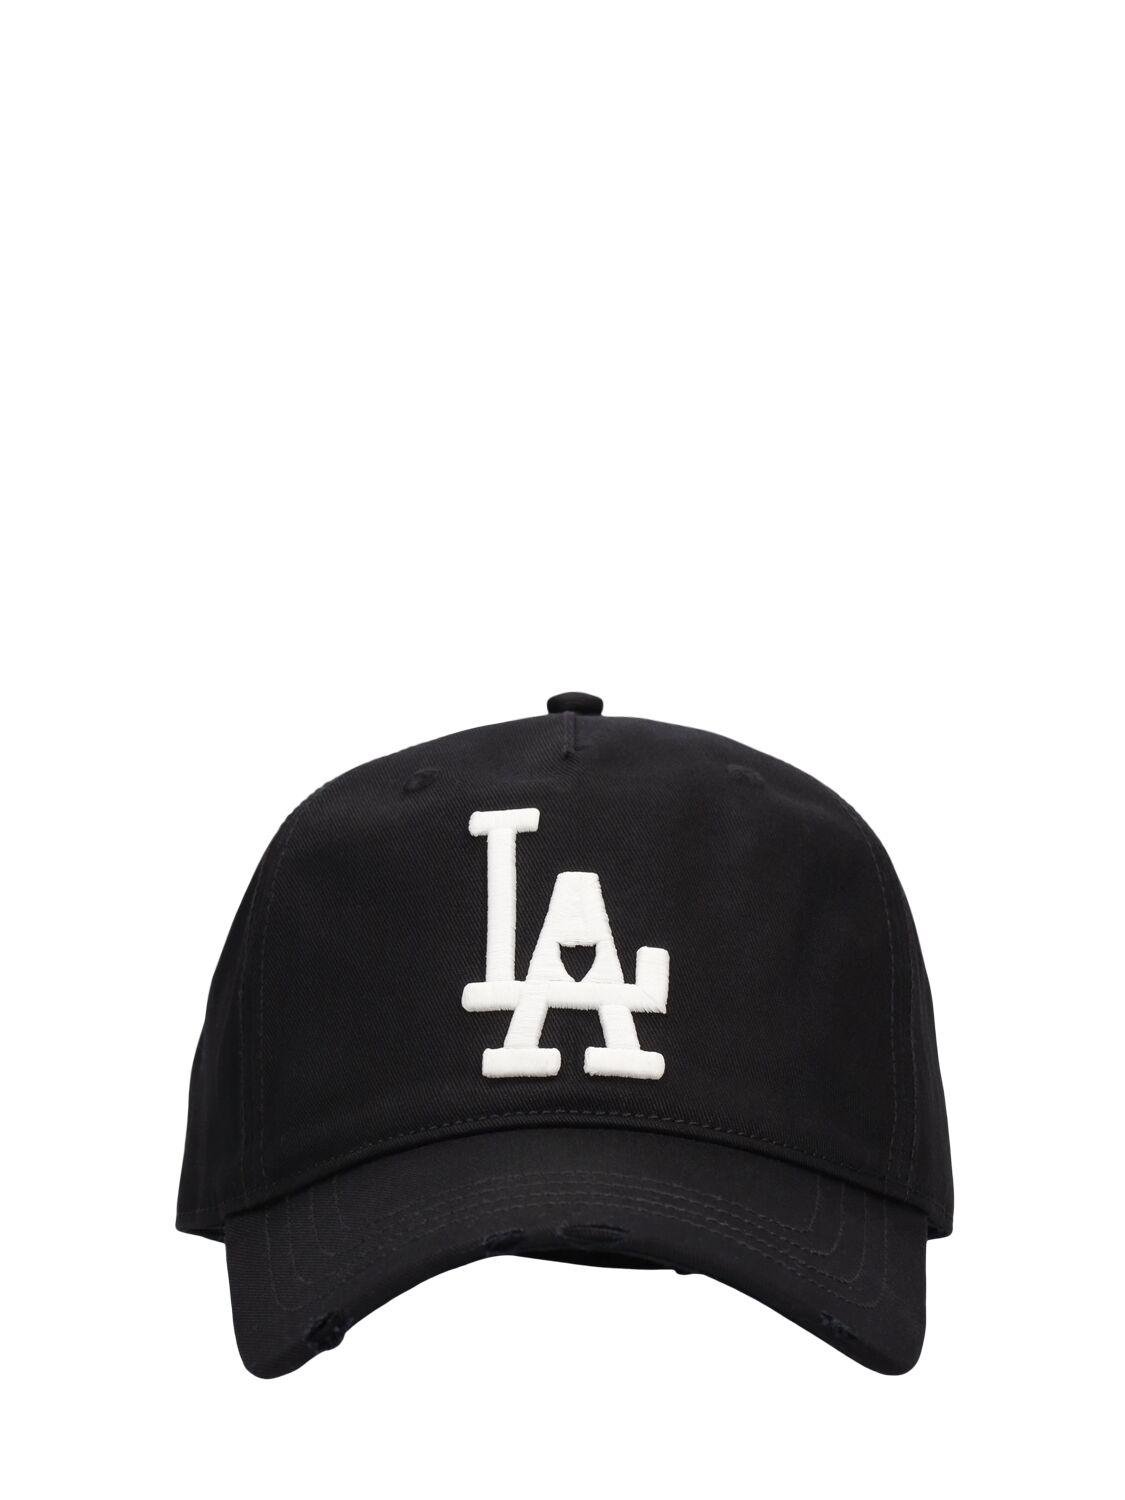 Embroidered La Logo Cotton Baseball Cap by HTC LOS ANGELES